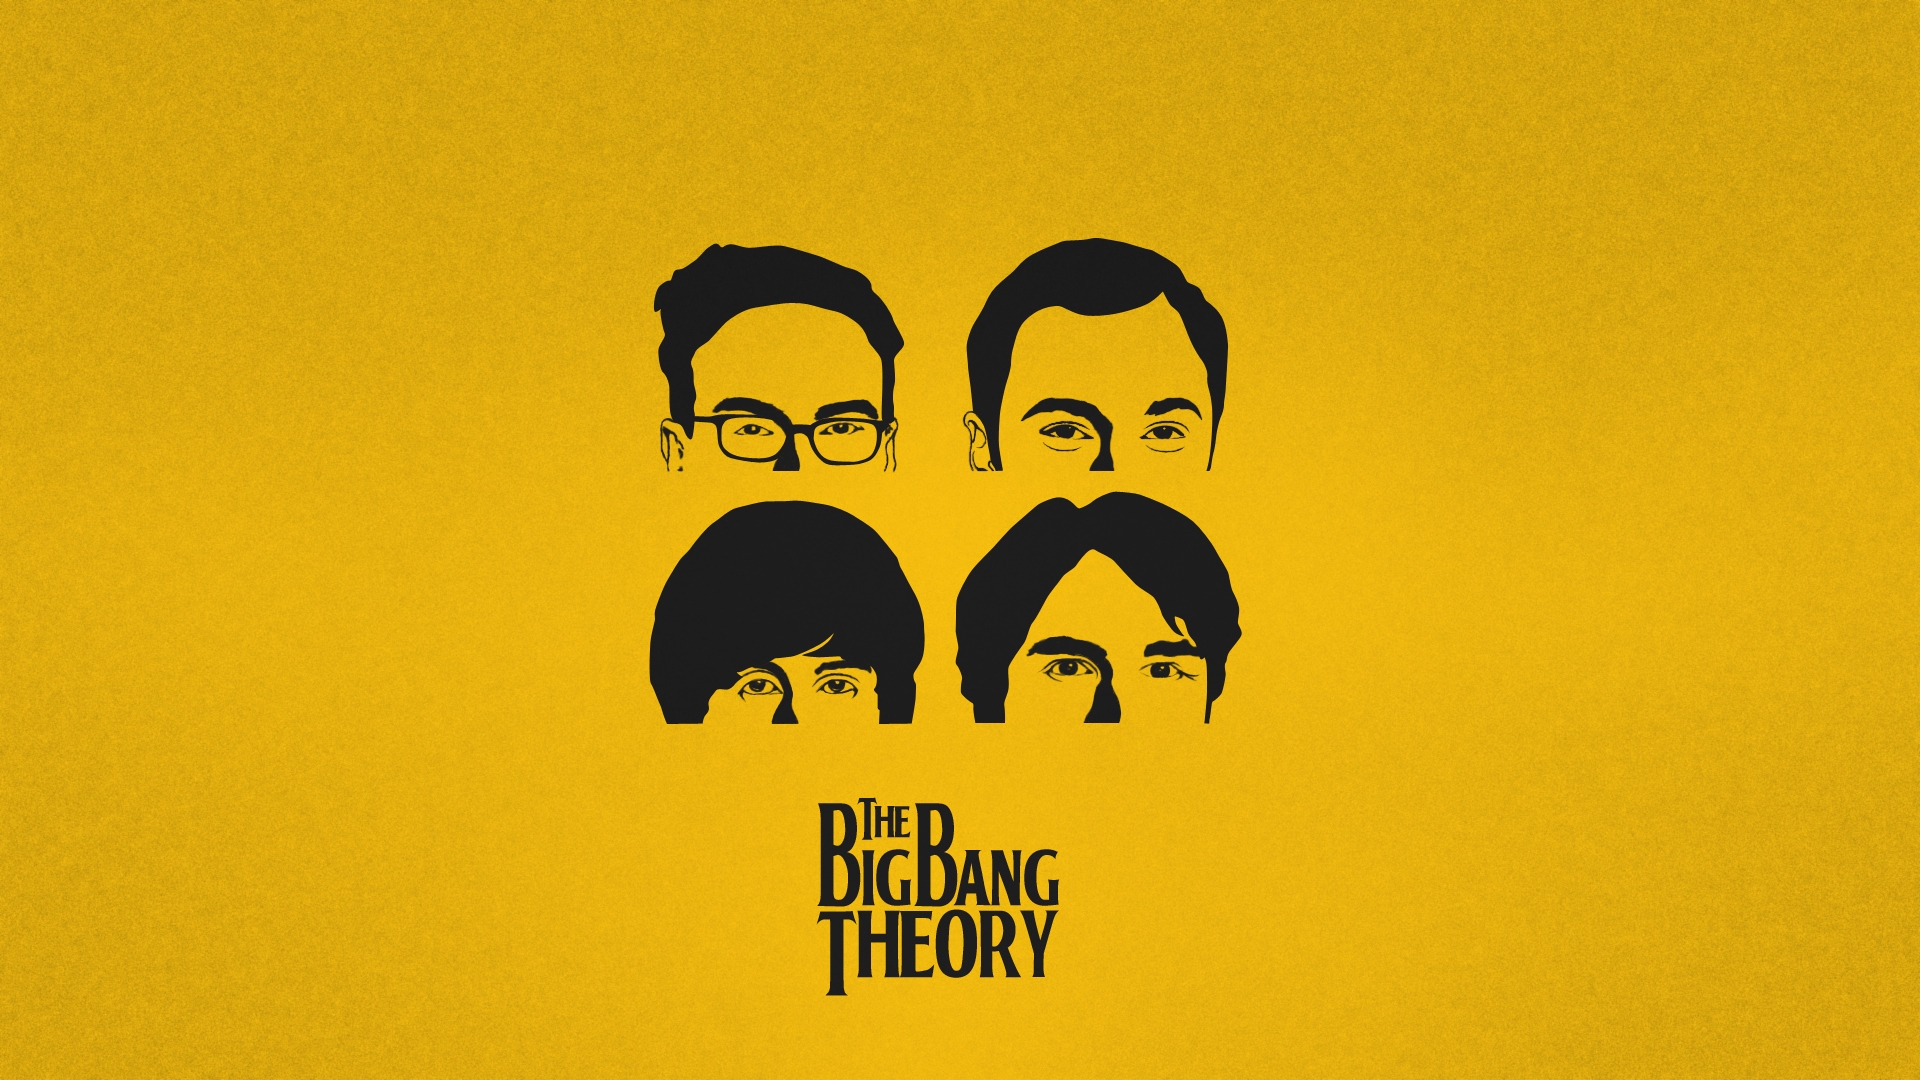 The Big Bang Theory Actors for 1920 x 1080 HDTV 1080p resolution